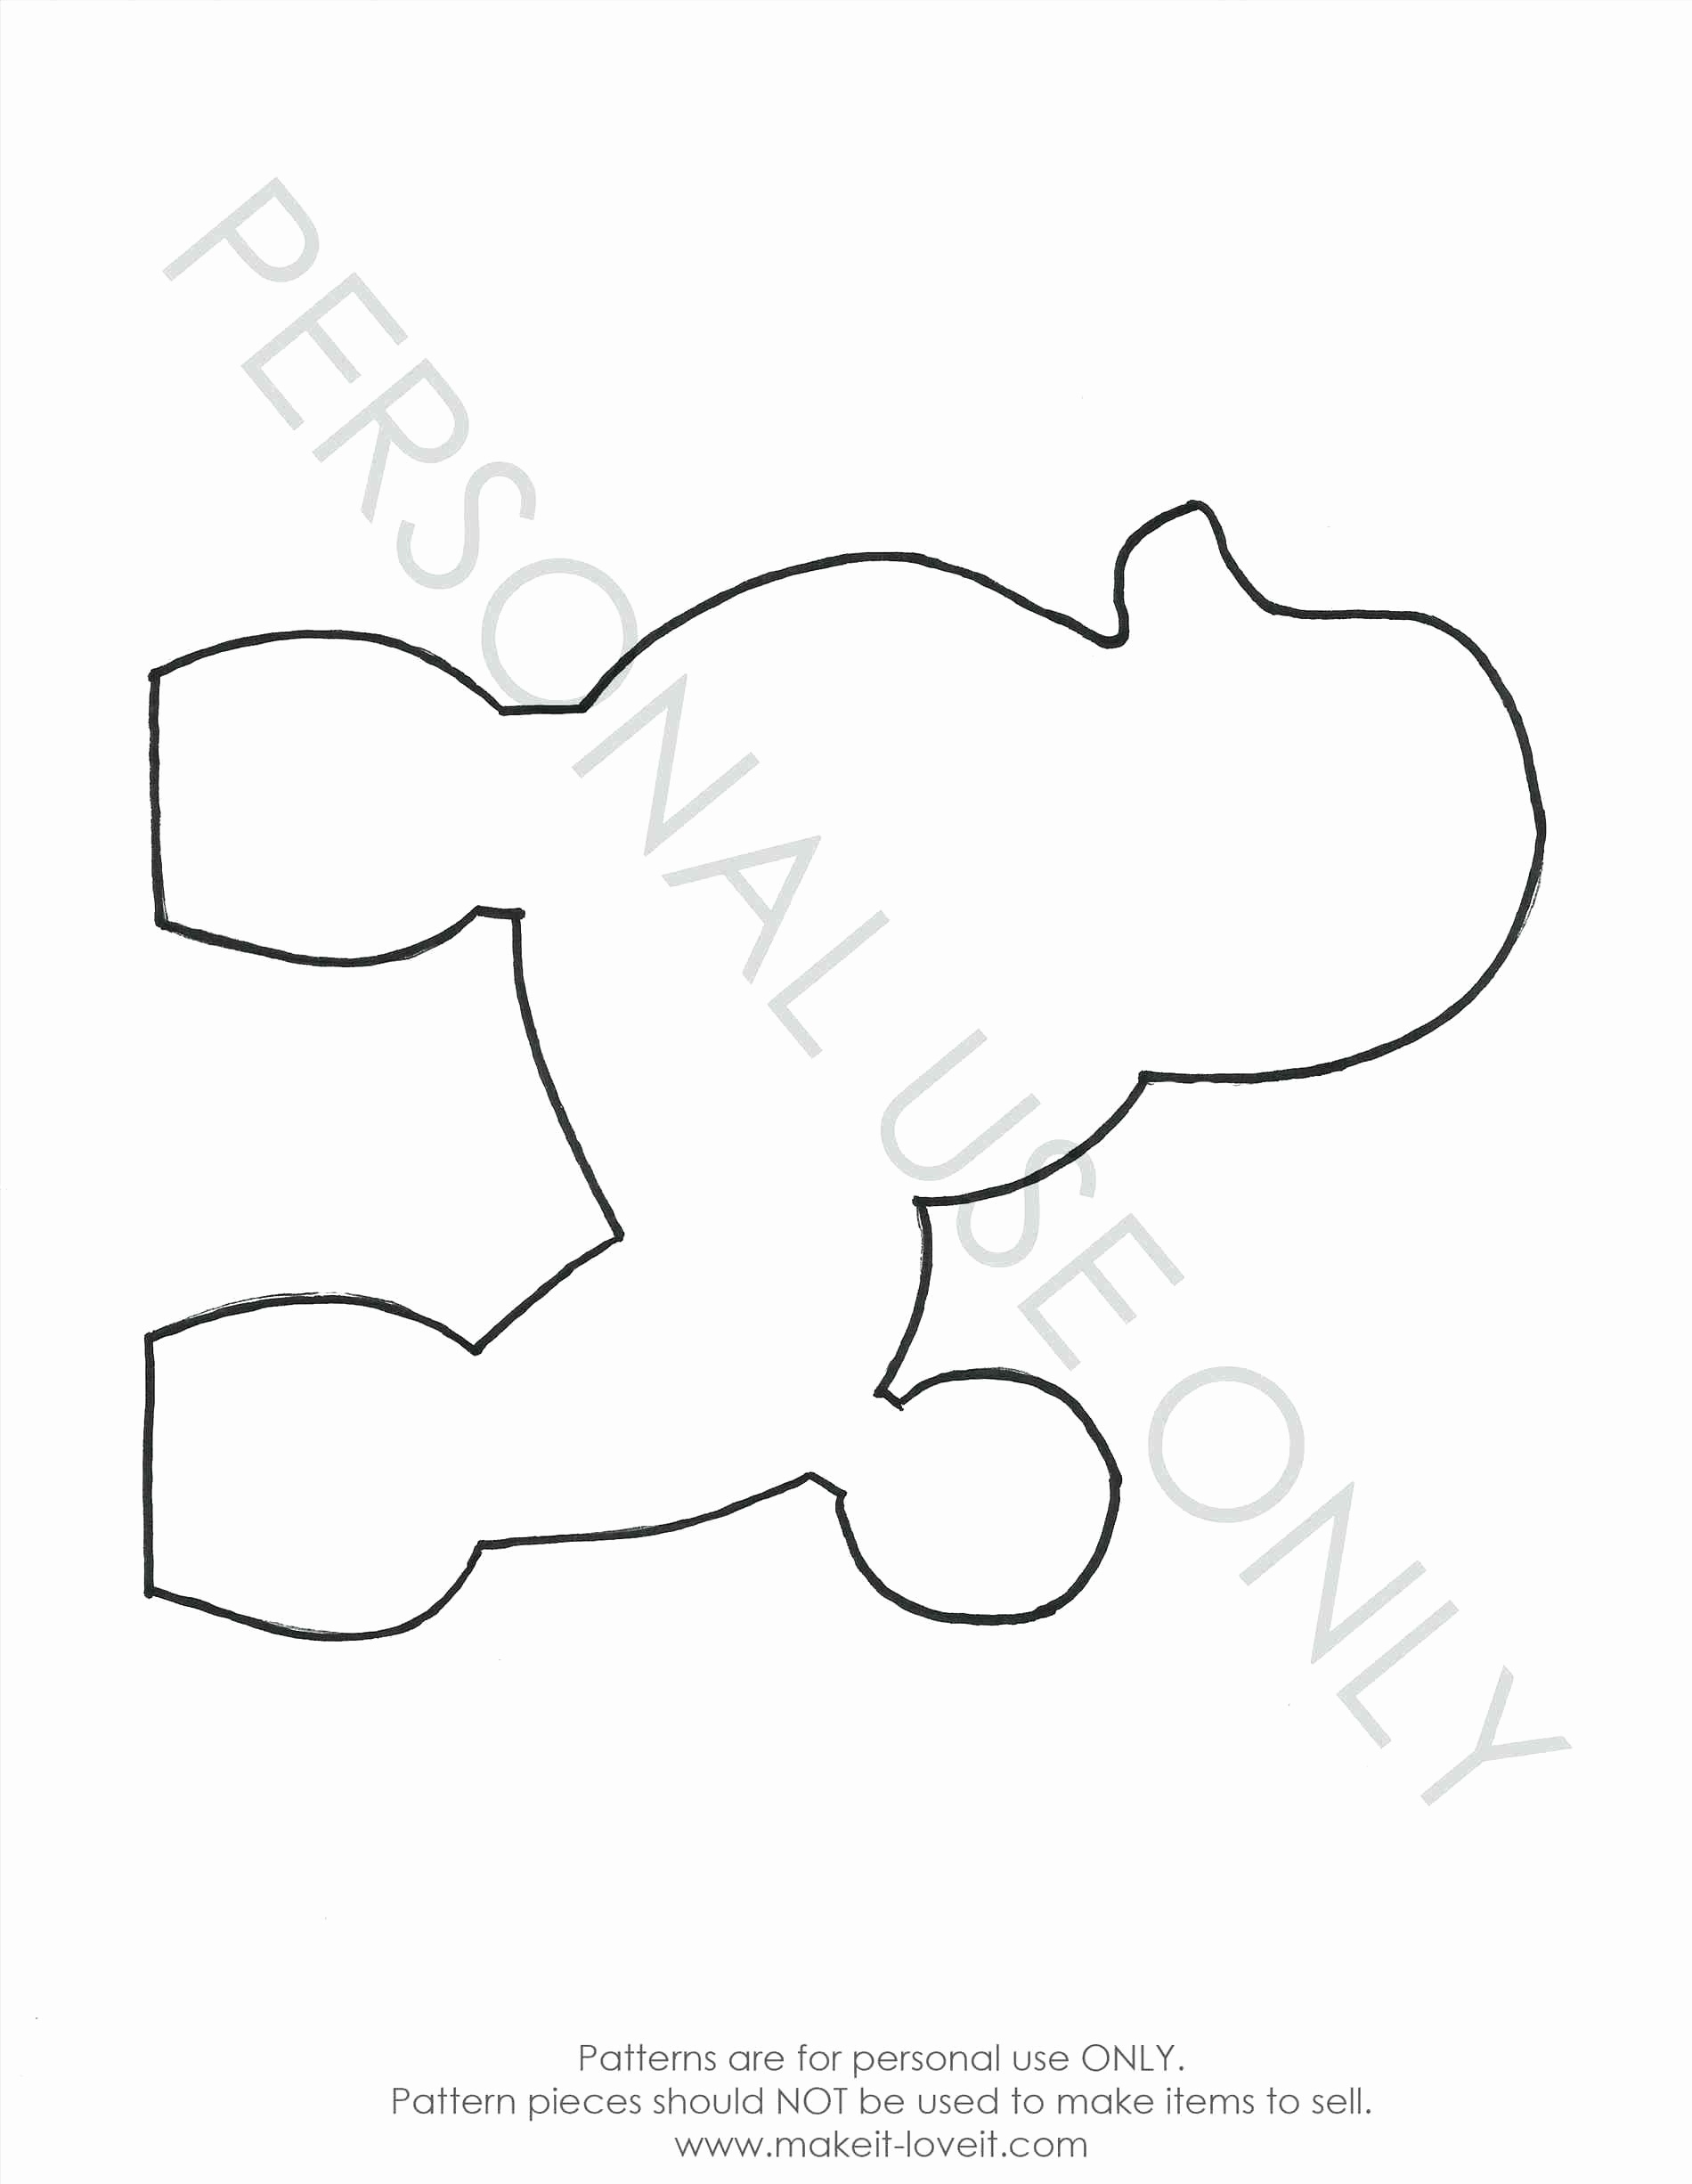 Free Printable Poodle Template – Rtrs.online - Free Printable Poodle Template